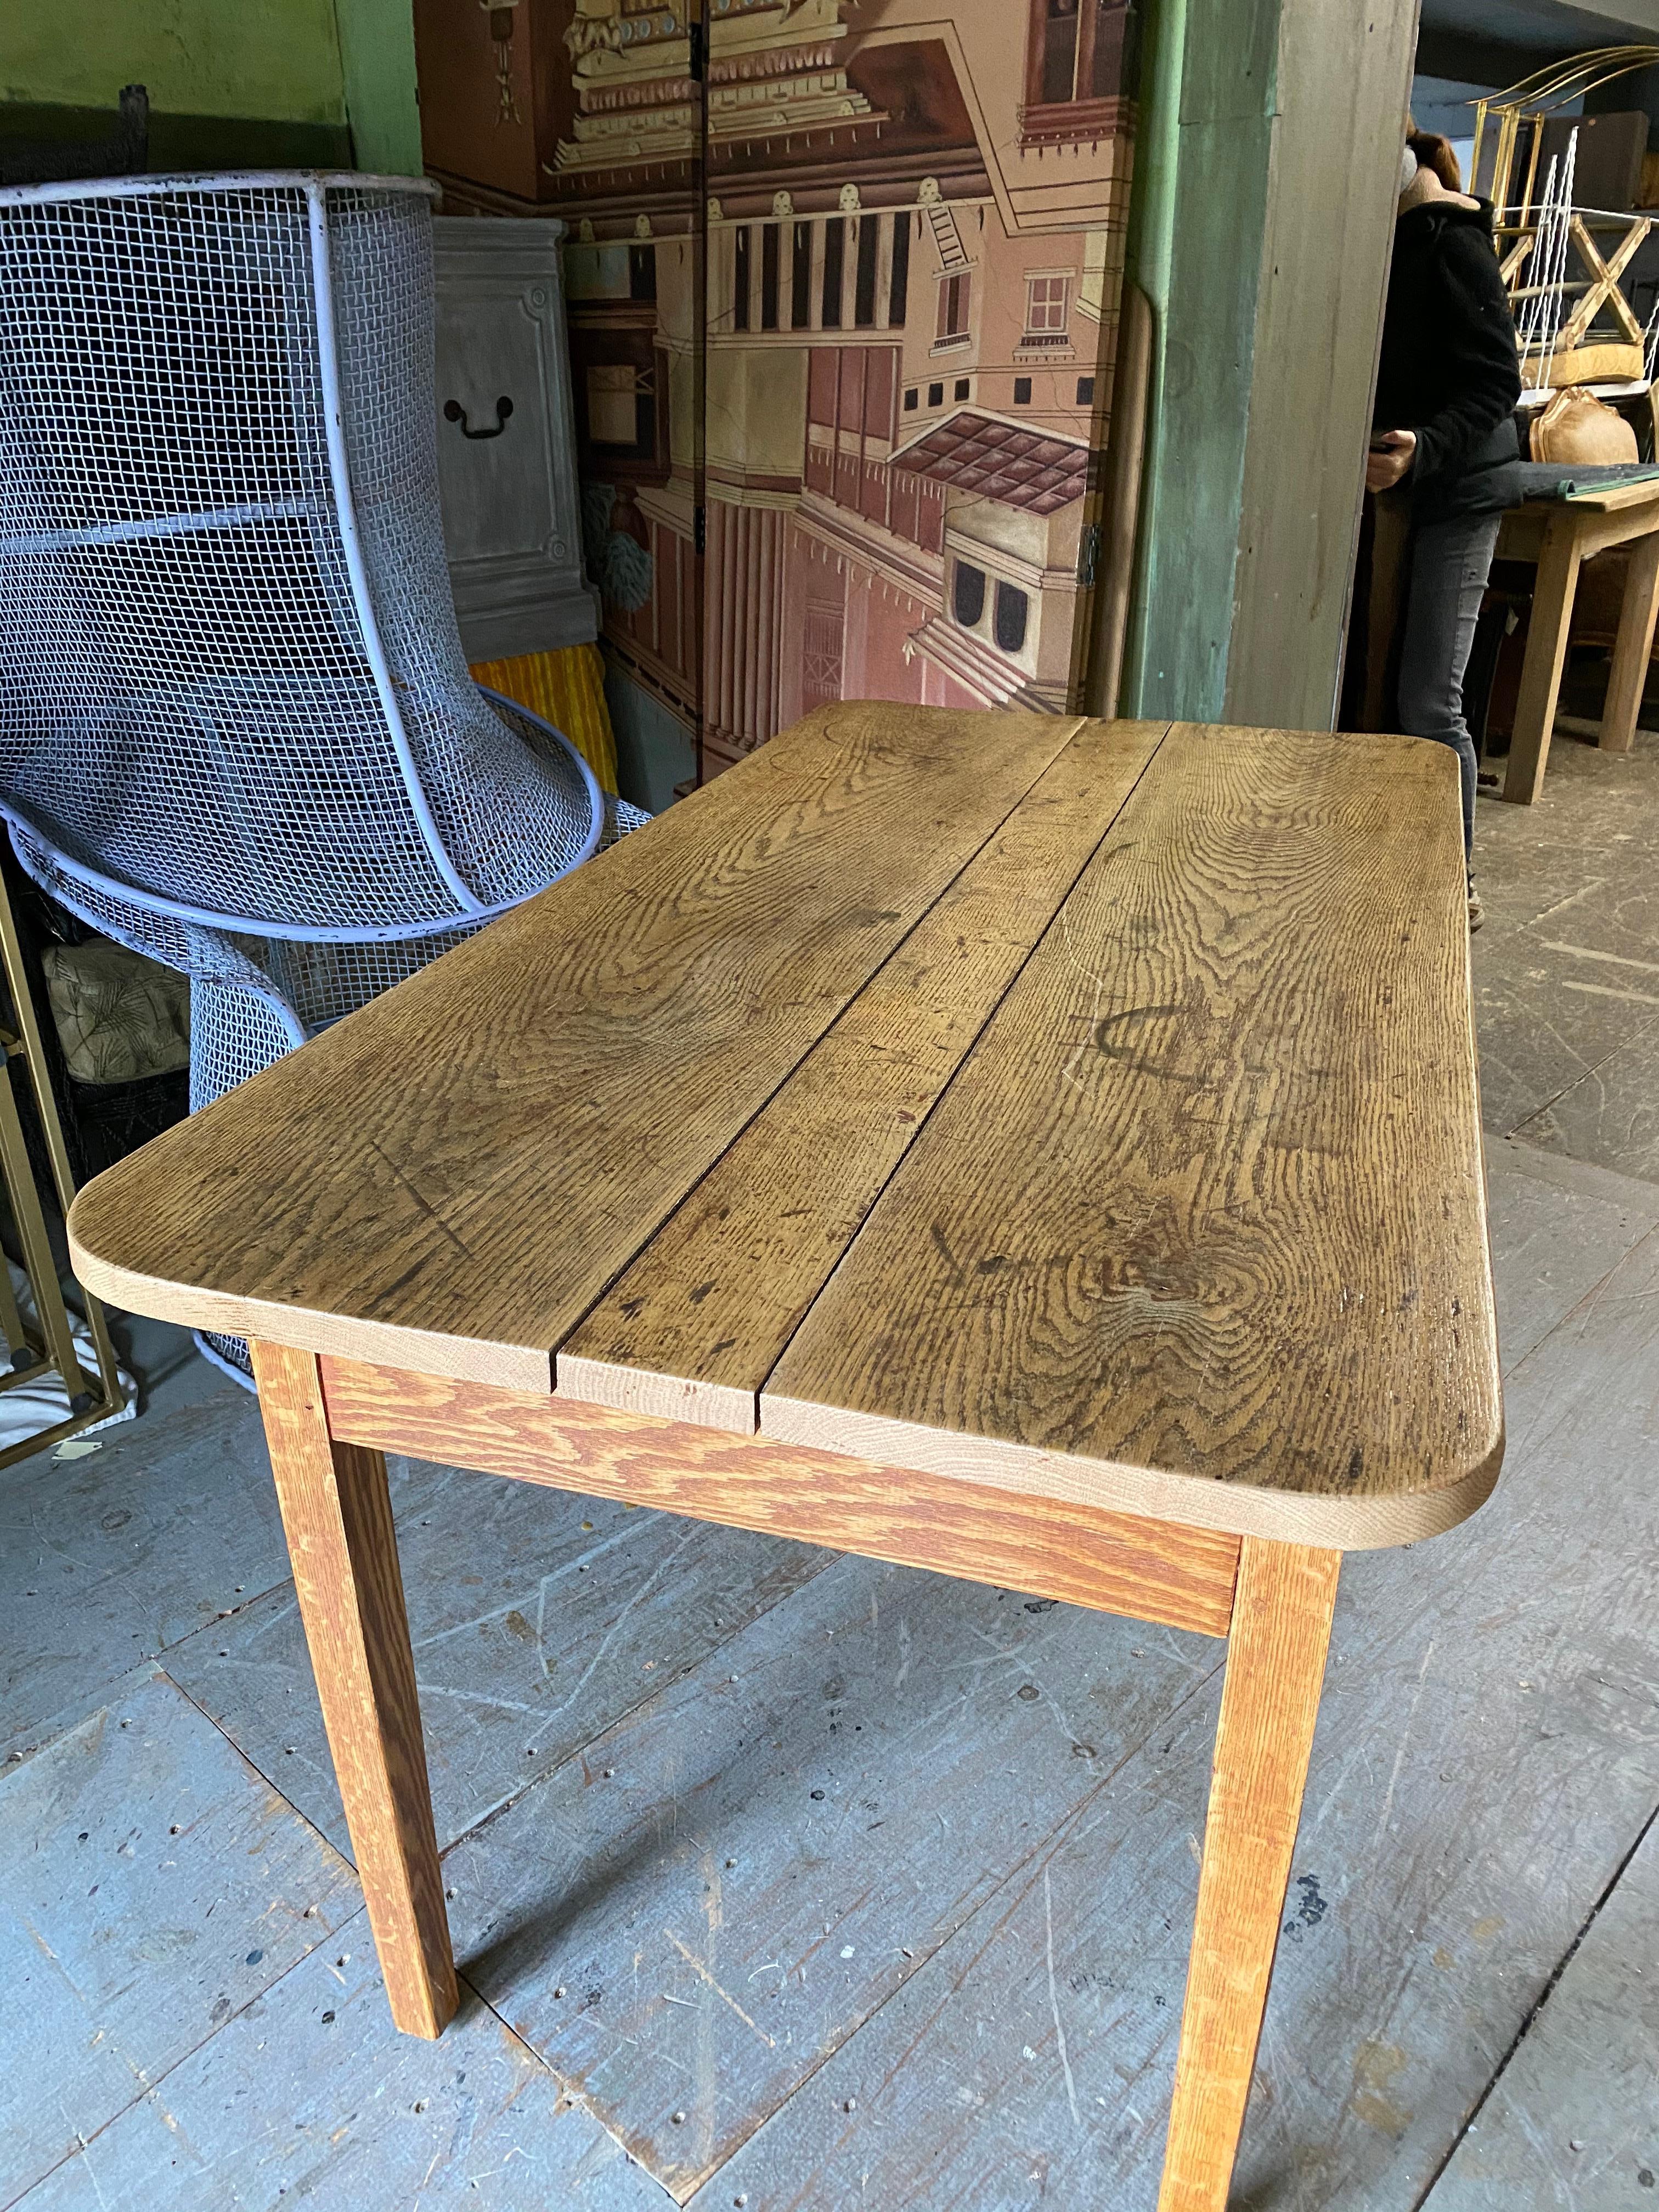 Early oak small dining, harvest table or desk. Great breakfast table in a rustic, farm, country setting or mix it up with contemporary modern industrial decor. Oak tabletop shows early wear and great patina. Top and base are a mix, earlier top and a